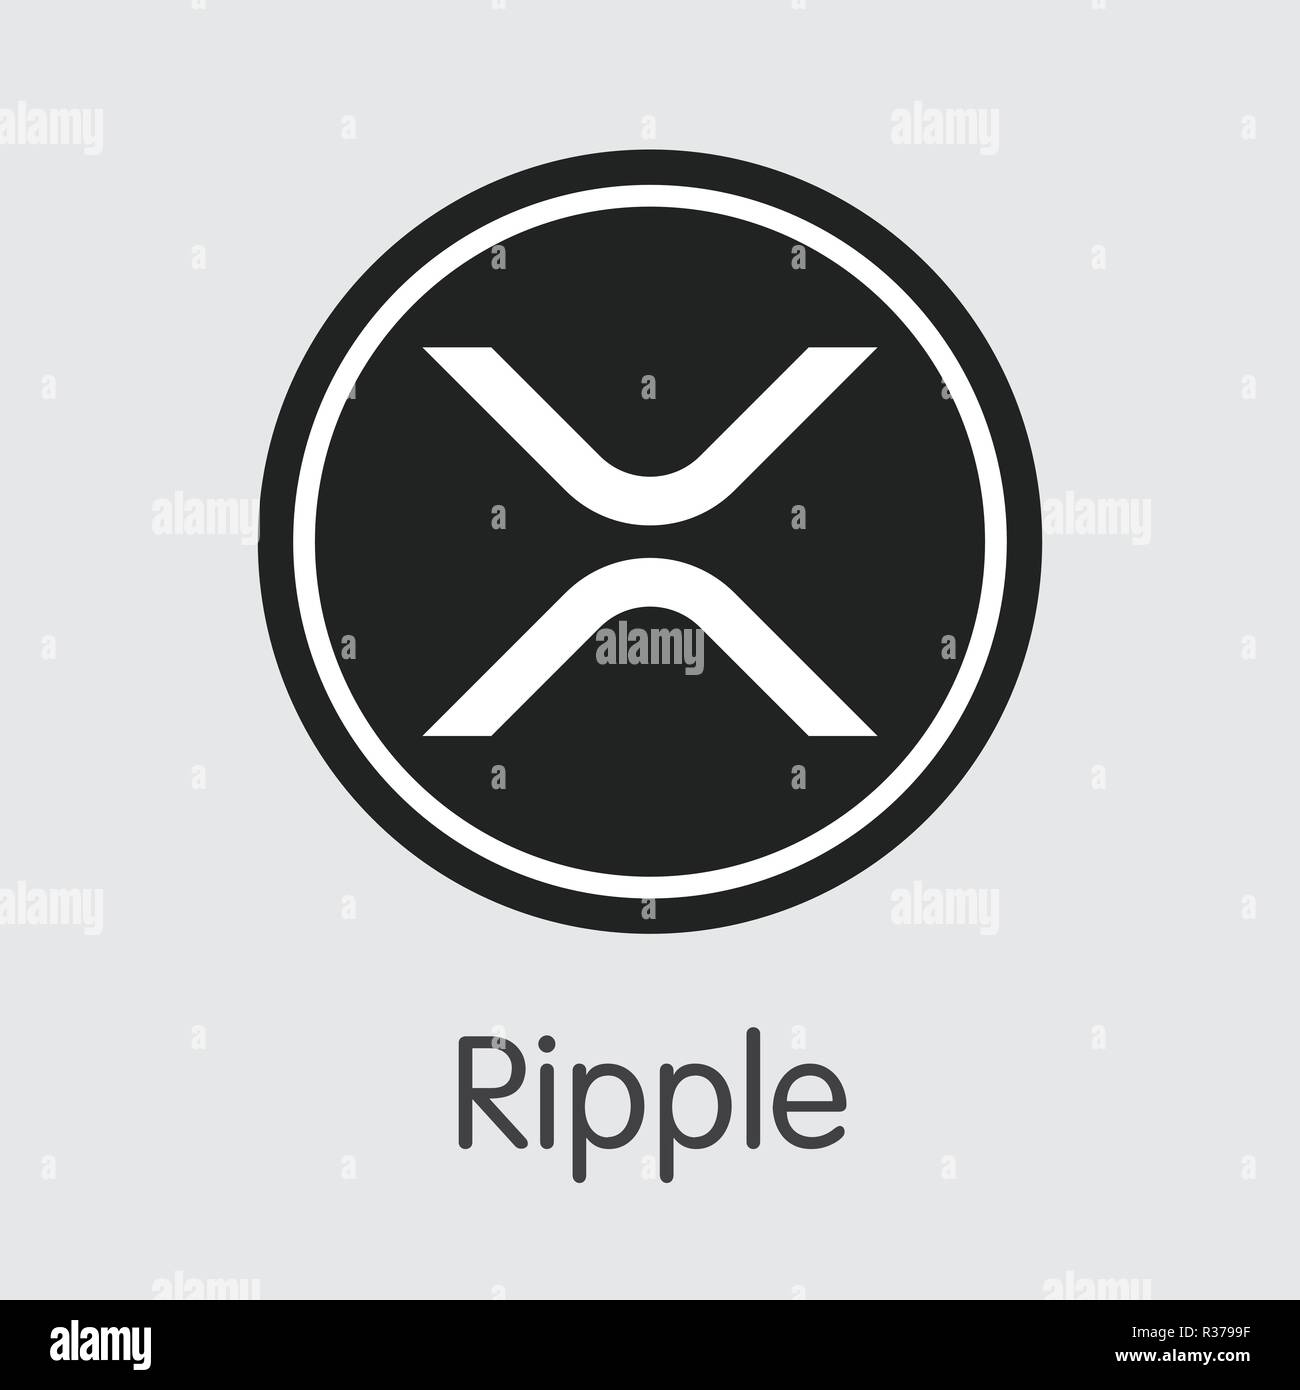 Ripple - Digital Coin Vector Icon of Cryptographic Currency. Stock Vector